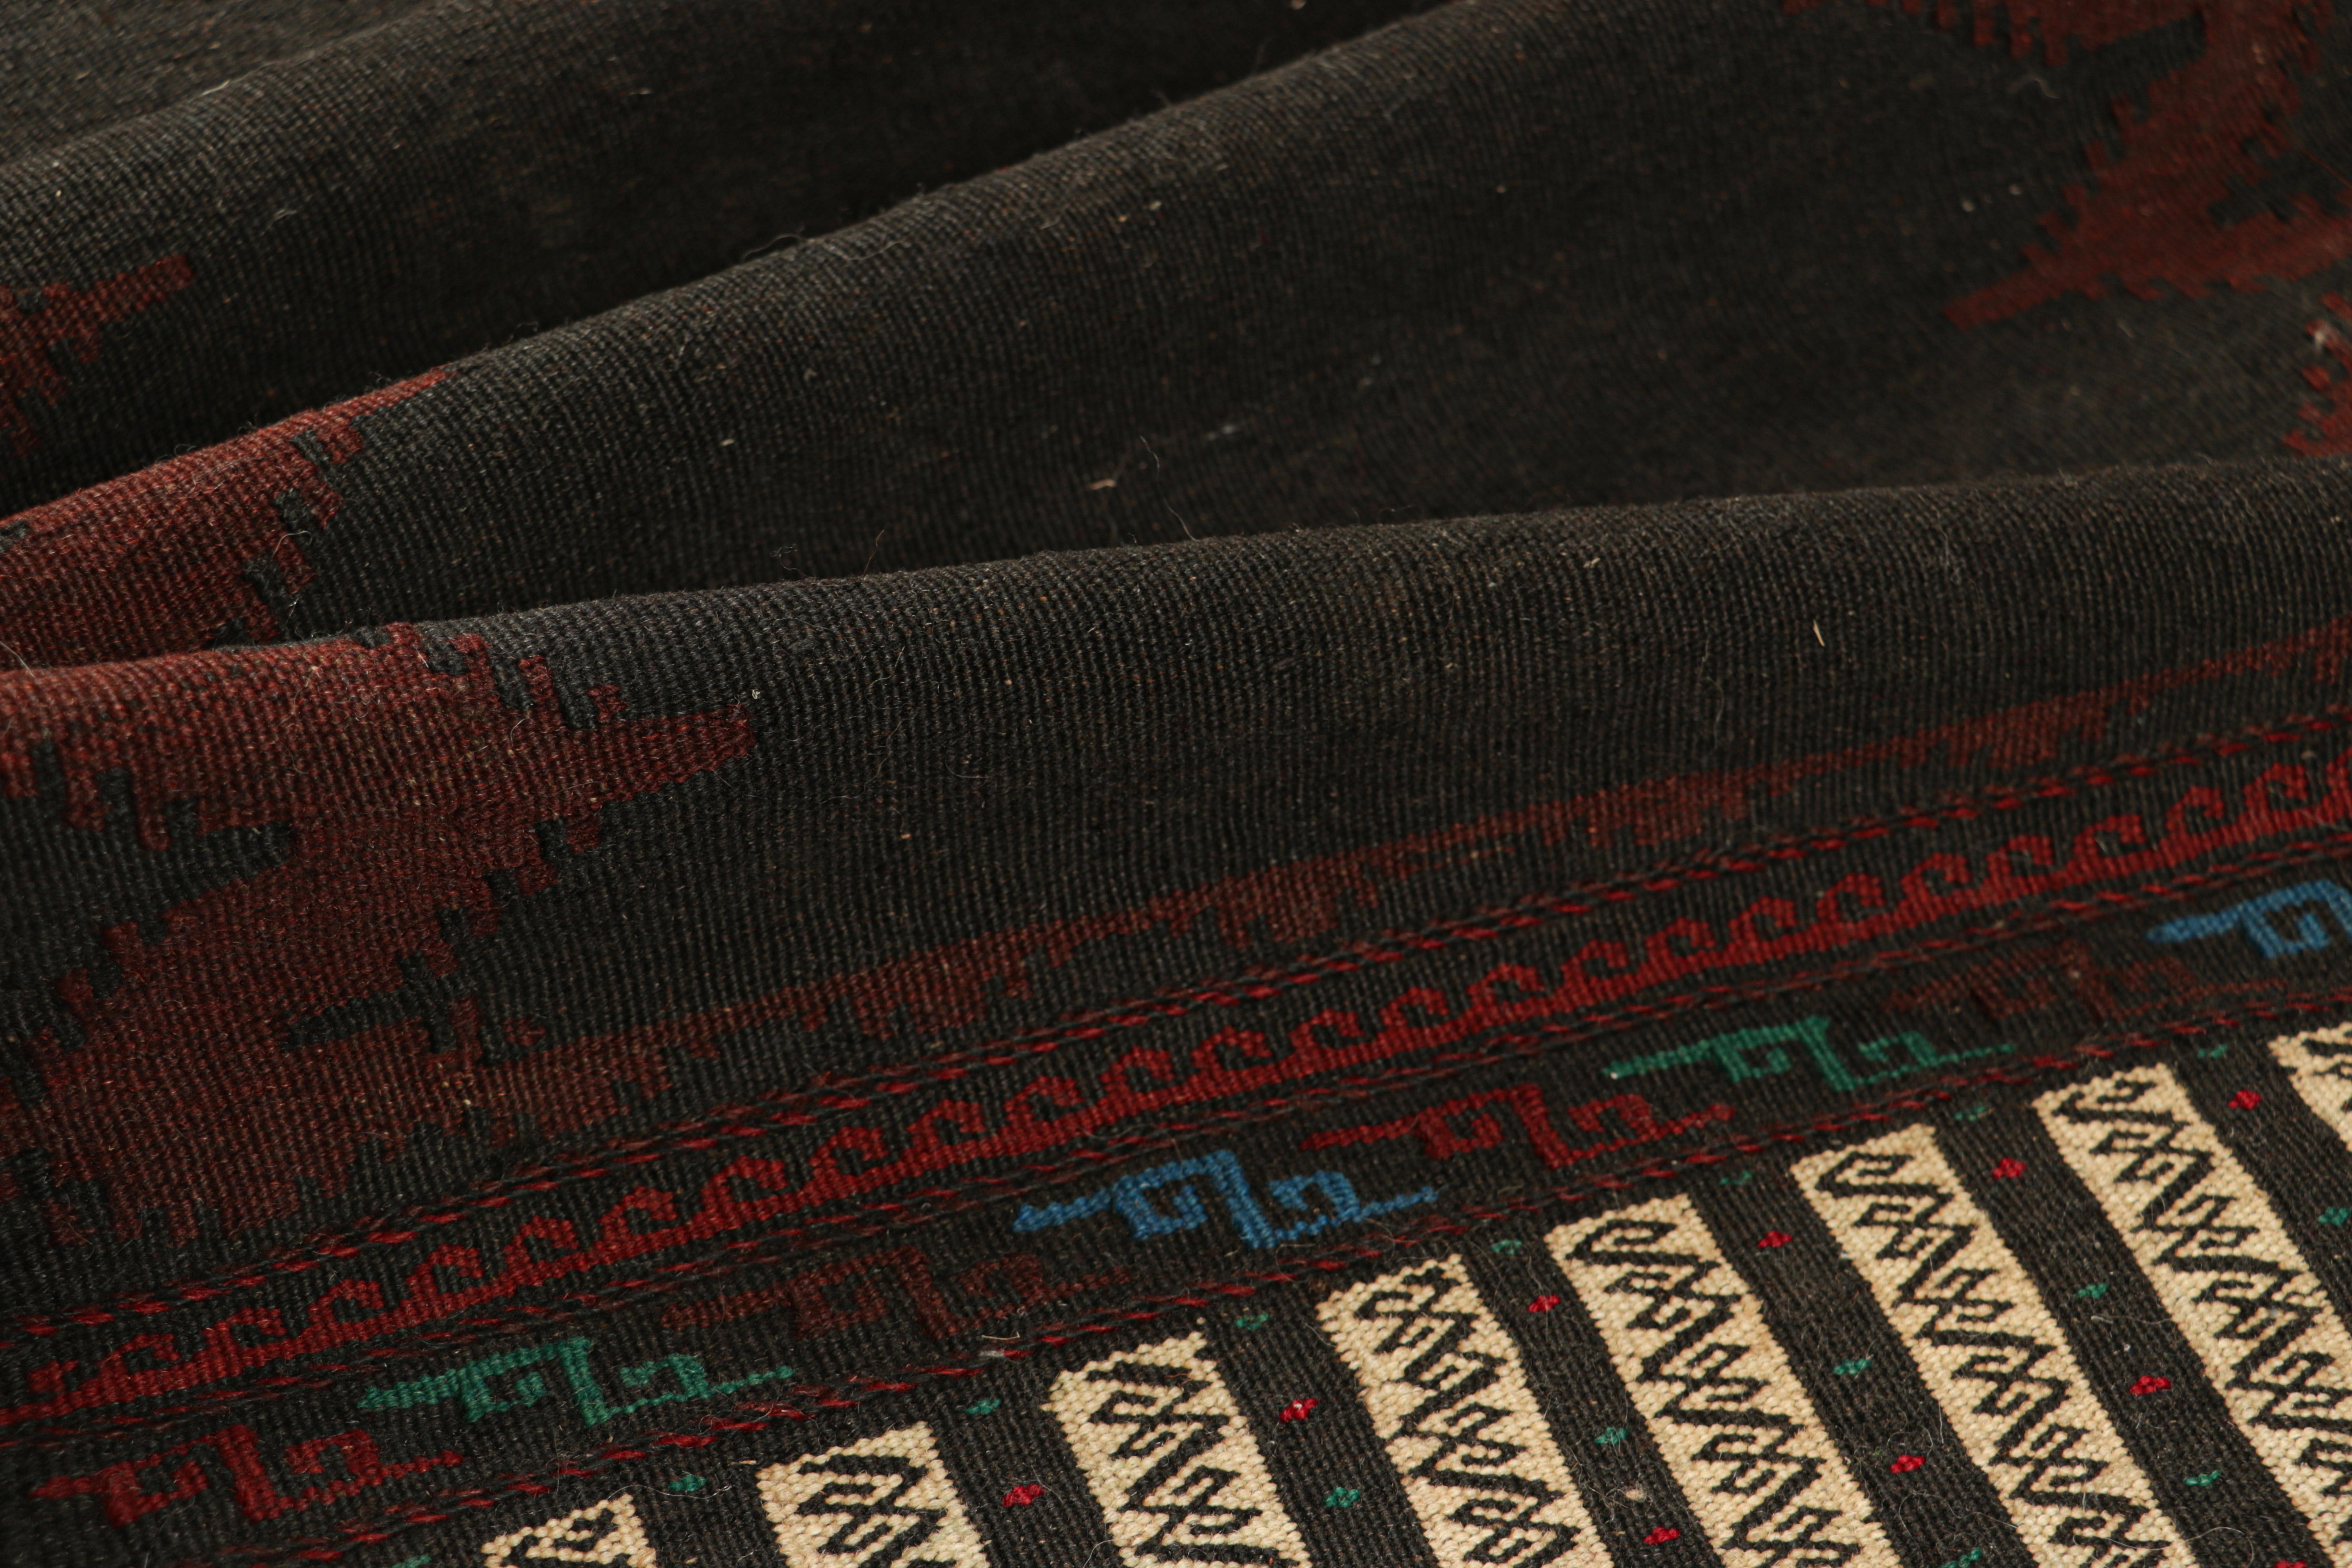 Hand-Woven Vintage Afghan Kilim in Chocolate Brown with Red Chevrons, from Rug & Kilim For Sale